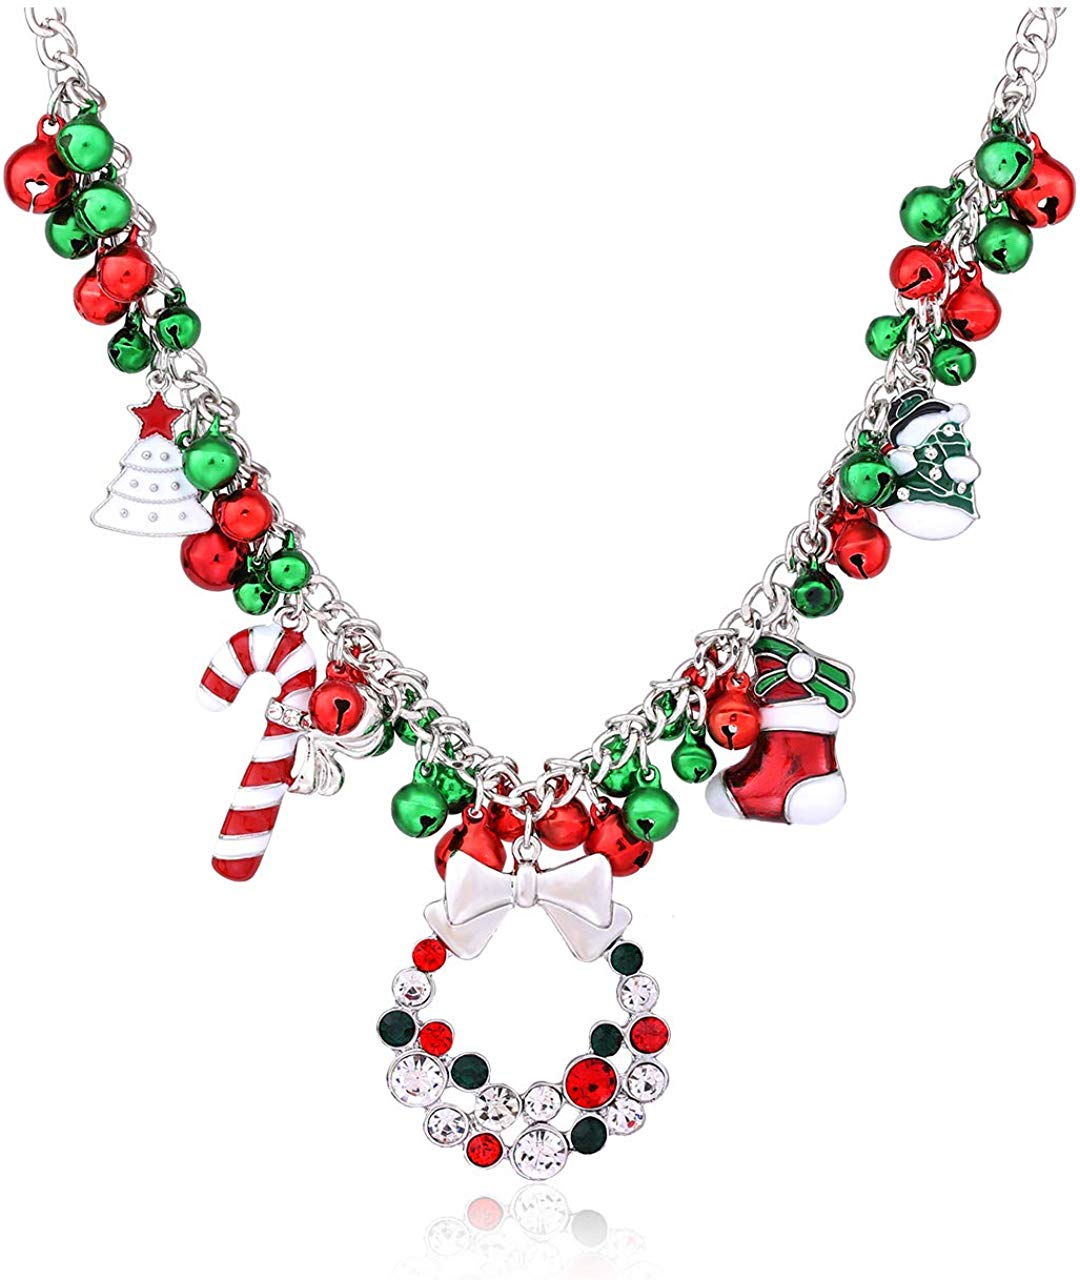 NLCAC Christmas Jingle Bell Necklace